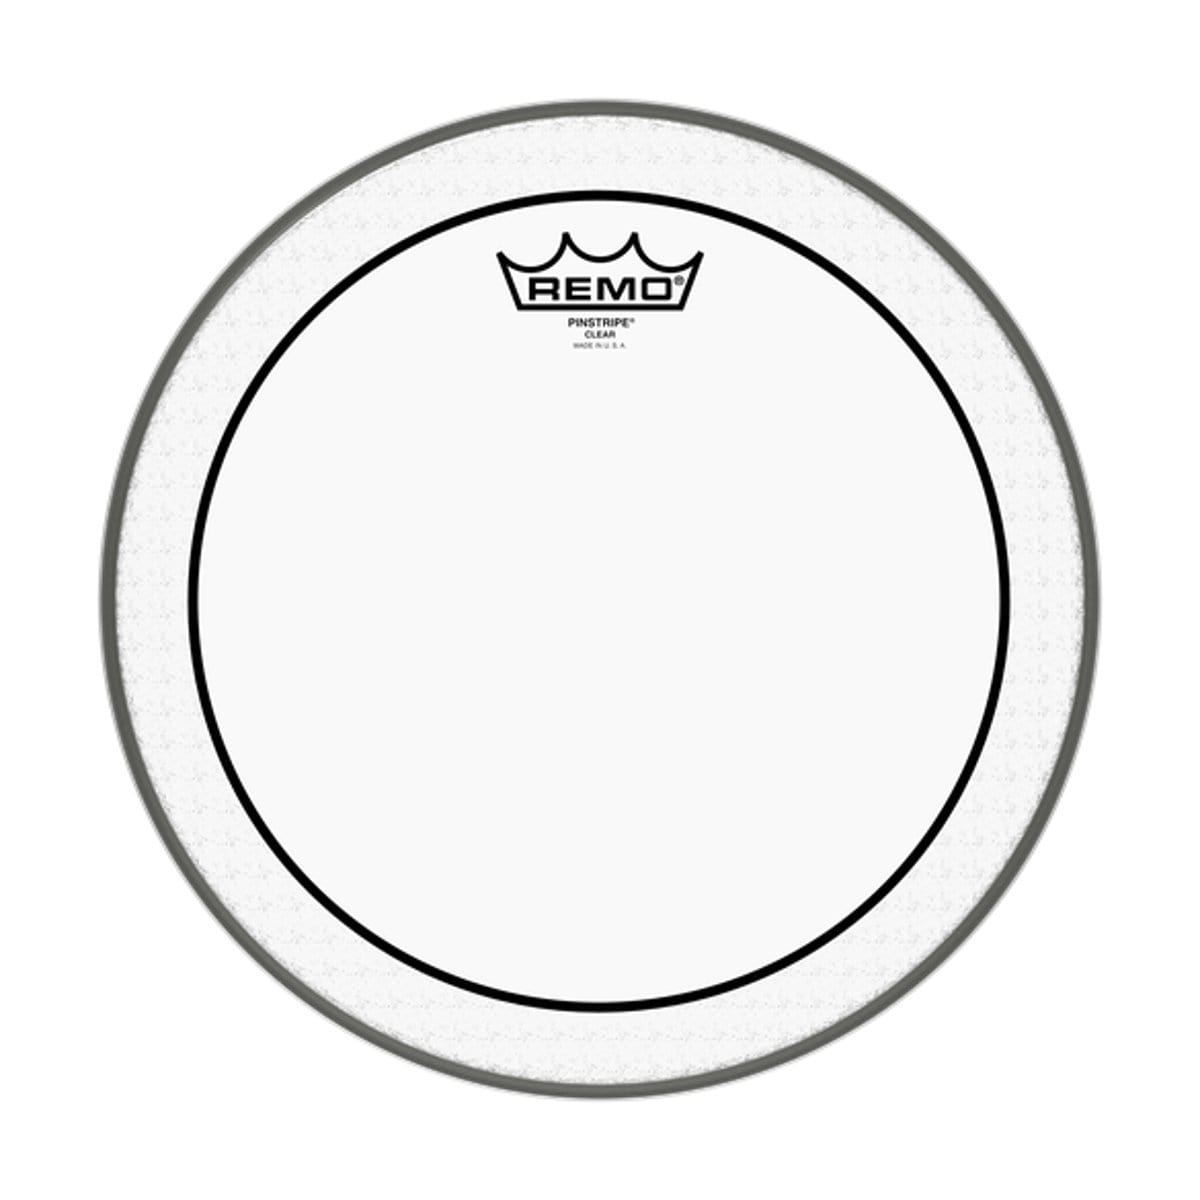 Remo Percussion Remo 12 Inch Drum Head Pinstripe Clear PS-0312-00 - Byron Music